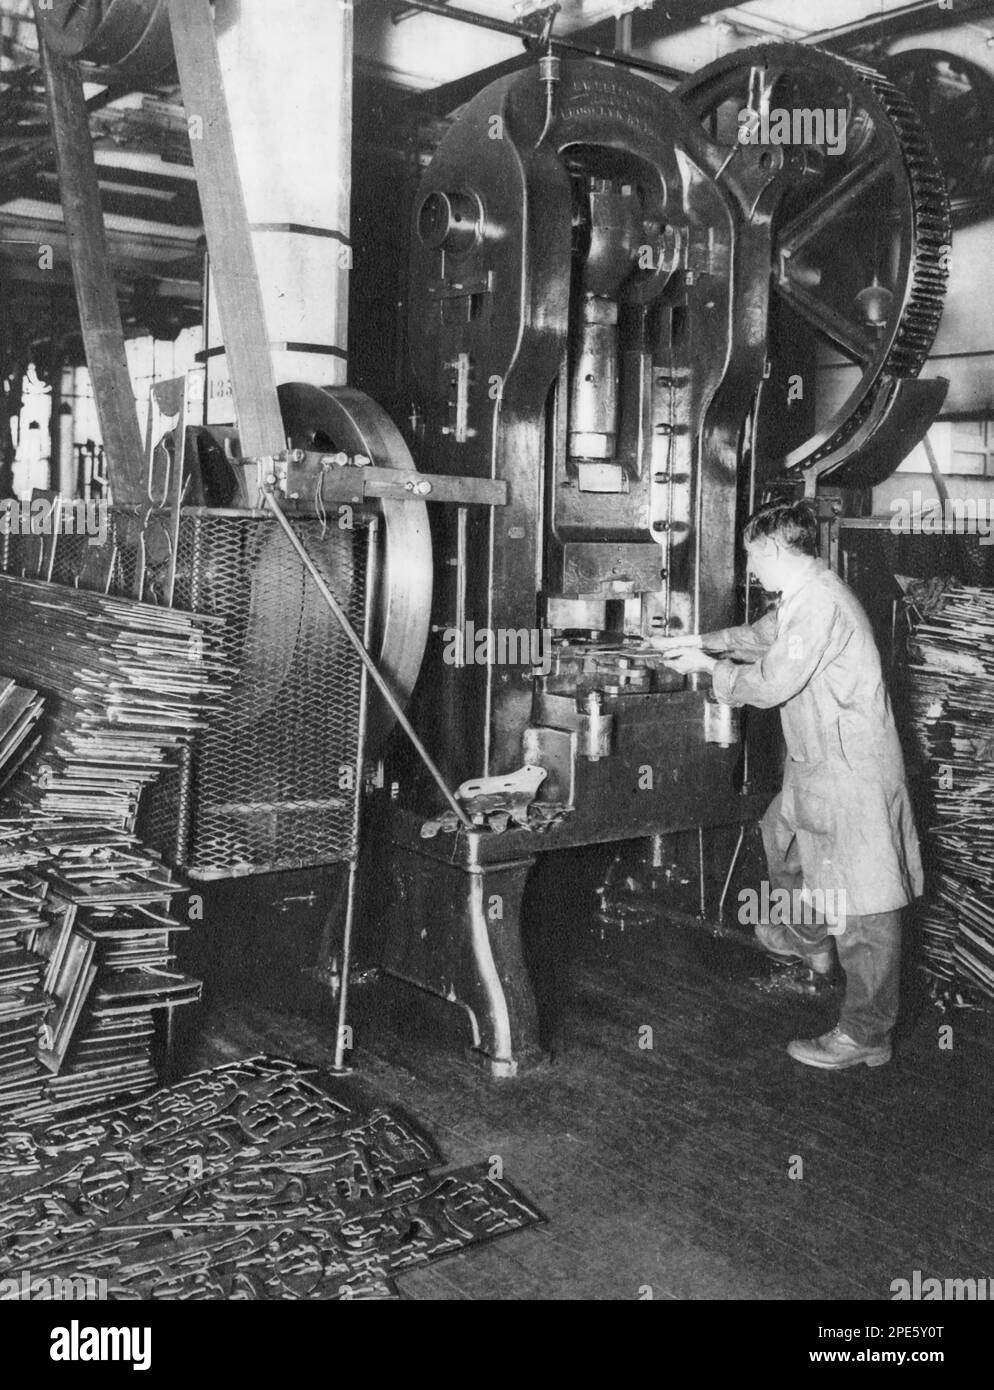 A power press at the Birmingham Small Arms Company Limited factory, c1933. The power press can be seen making motorcycle engine parts for BSA Motorcycles. Stock Photo